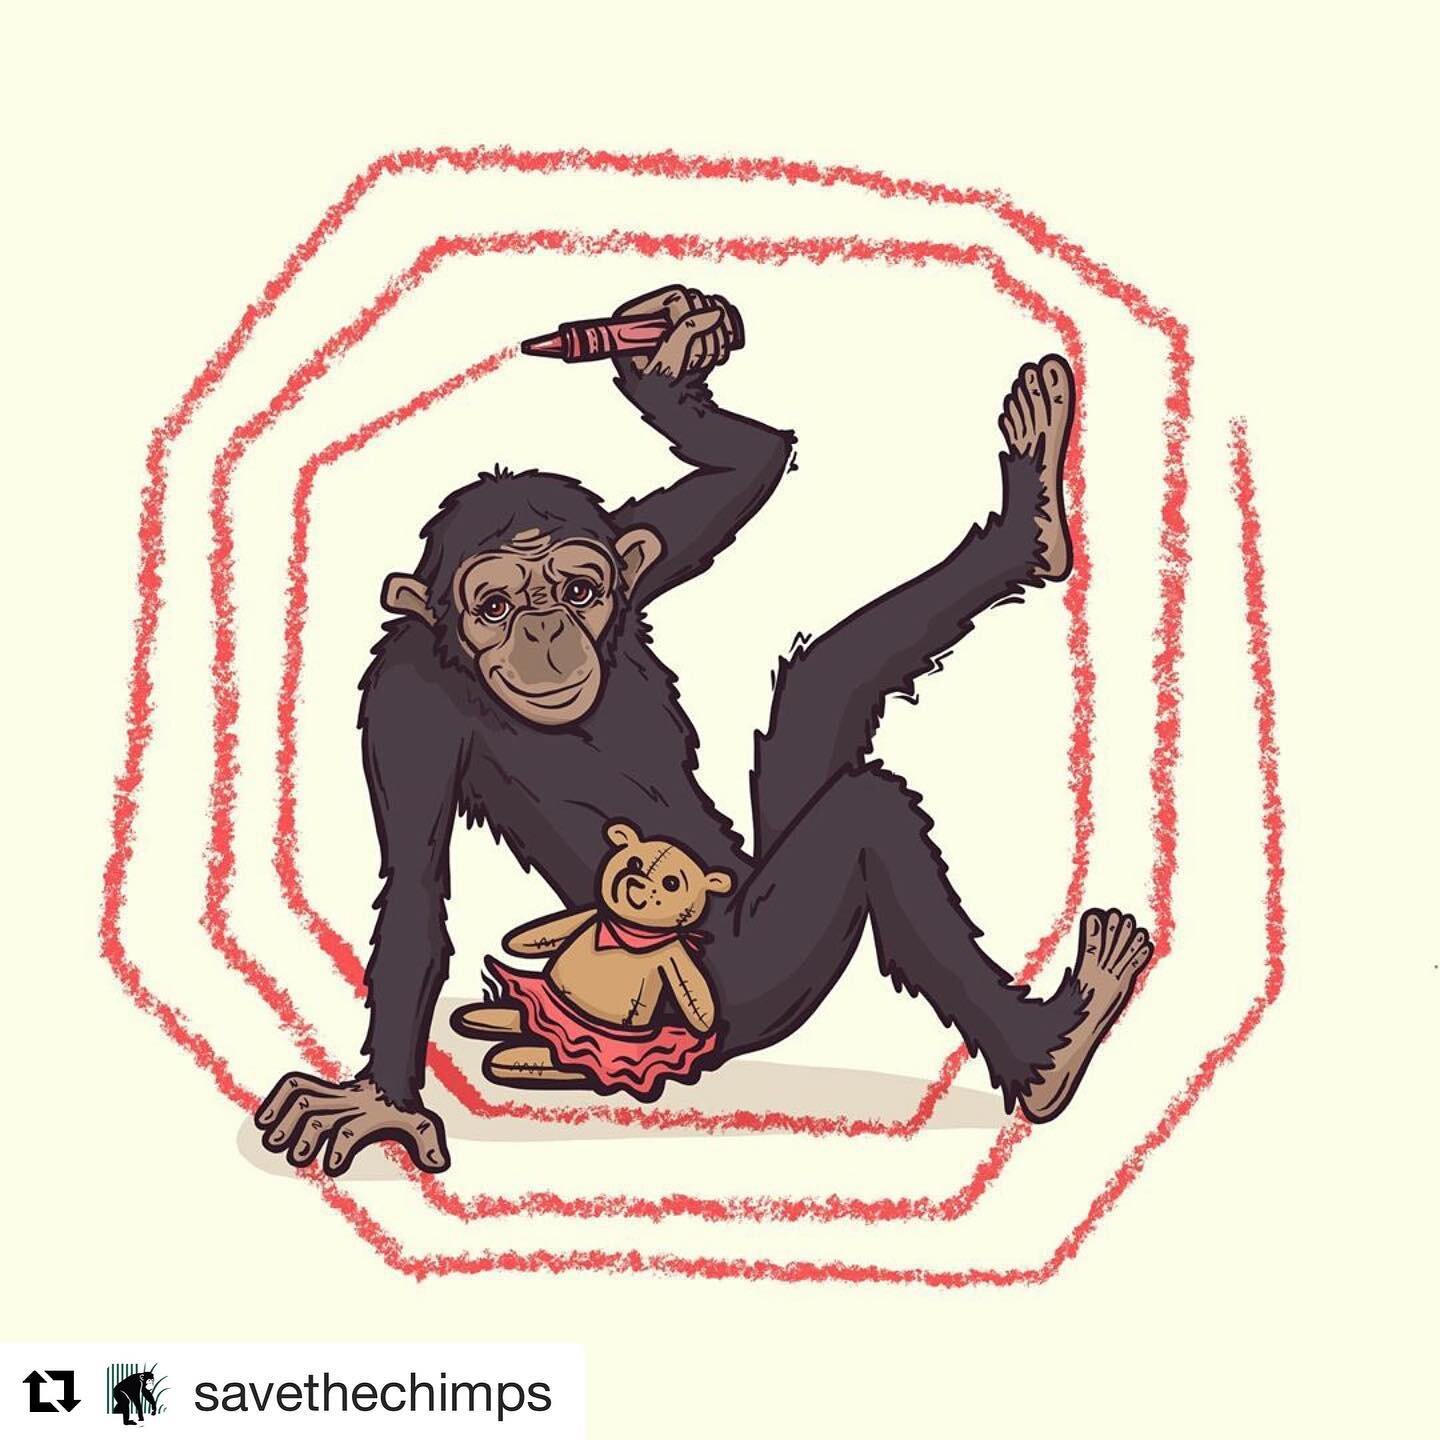 #Repost @savethechimps 🐒🐒🐒
・・・
Meet Lisa Marie! She worked in the entertainment industry for eight years before we rescued her. One of our most outgoing personalities, Lisa Marie loves playing with tutus and socializing with her BFF Jaybee. 💕 #Li